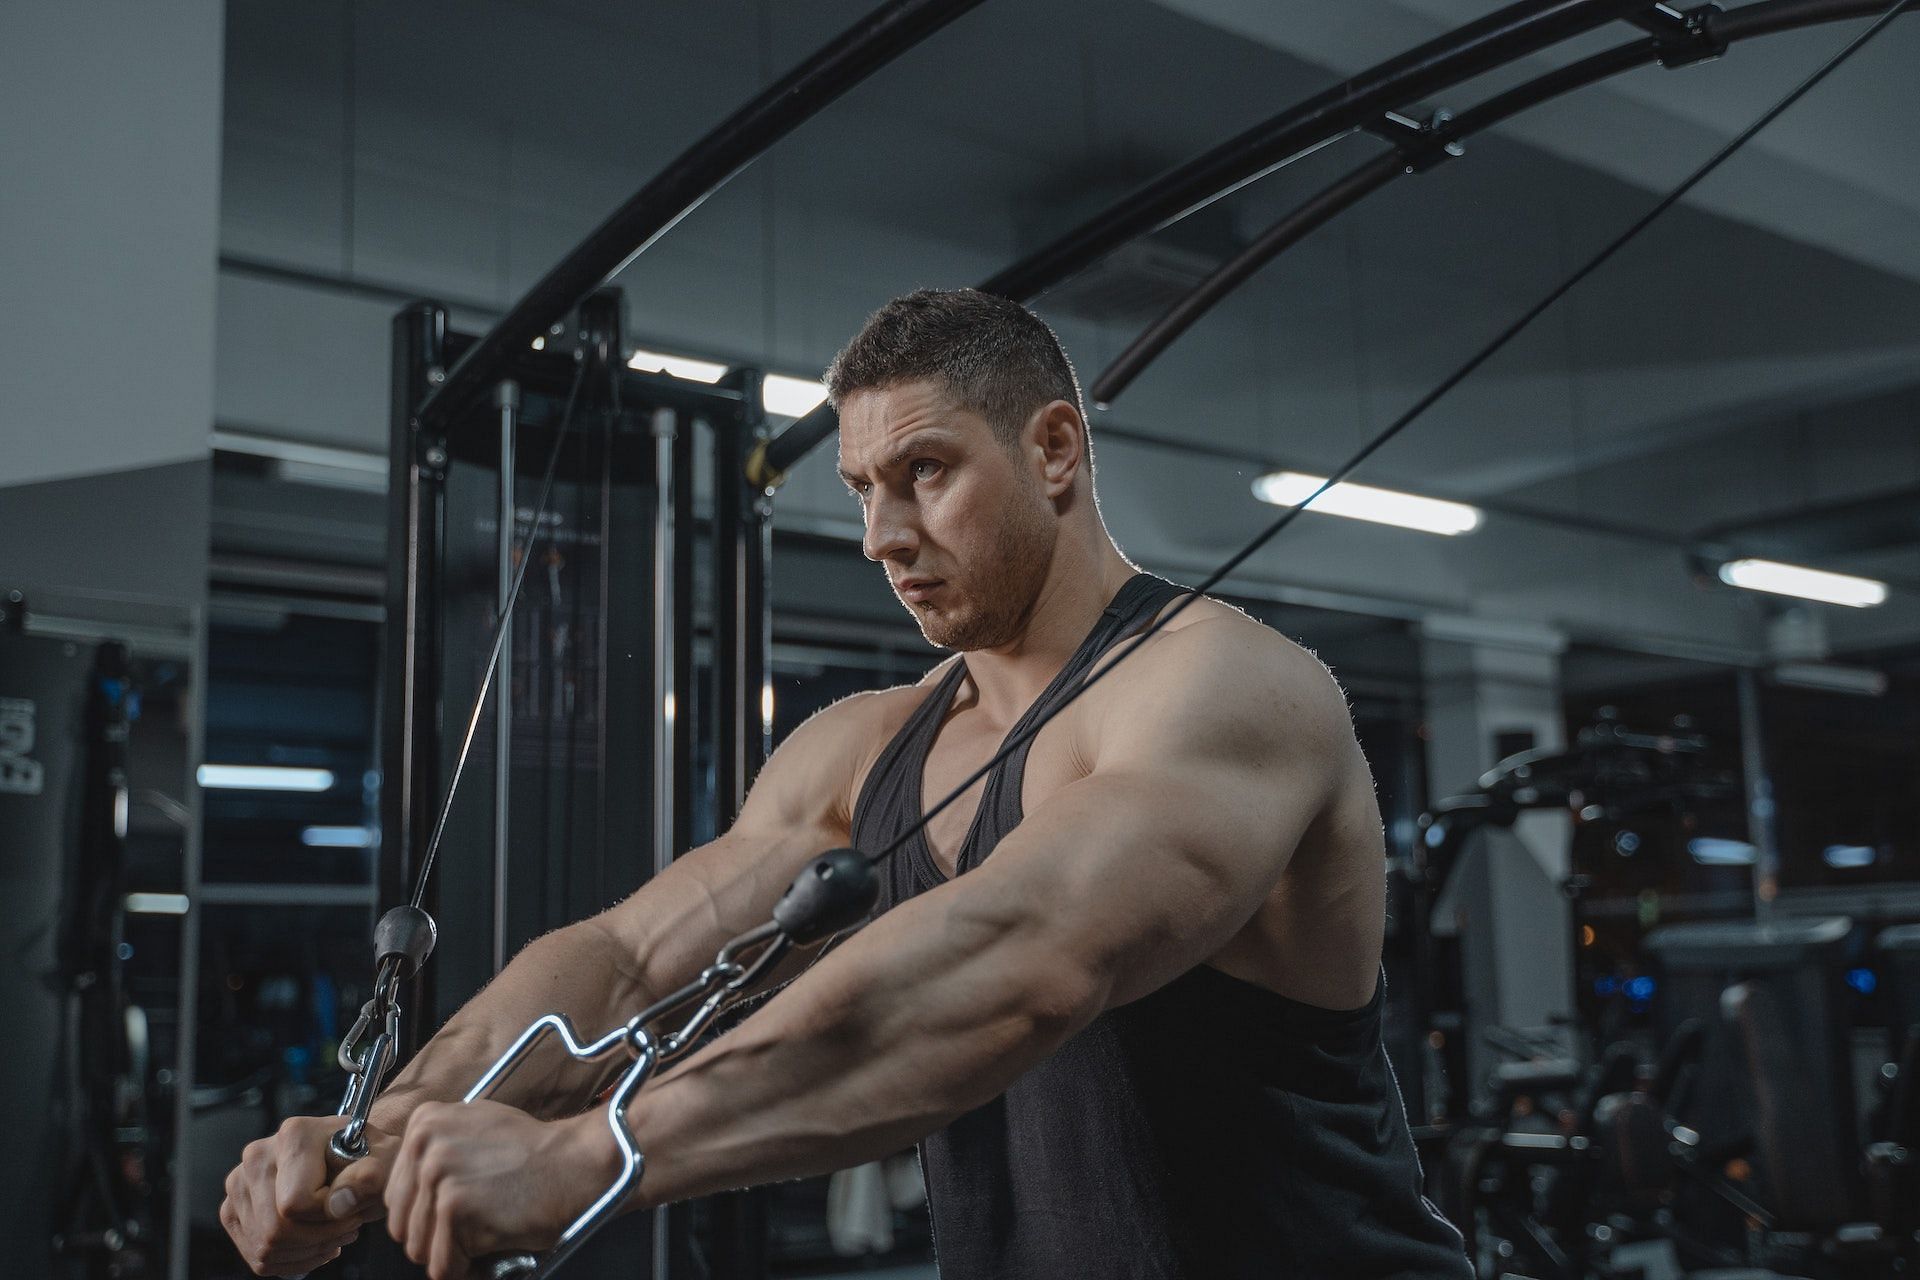 Arm cable rows can be done while standing. (Image via Pexels/Tima Miroshnichenko)